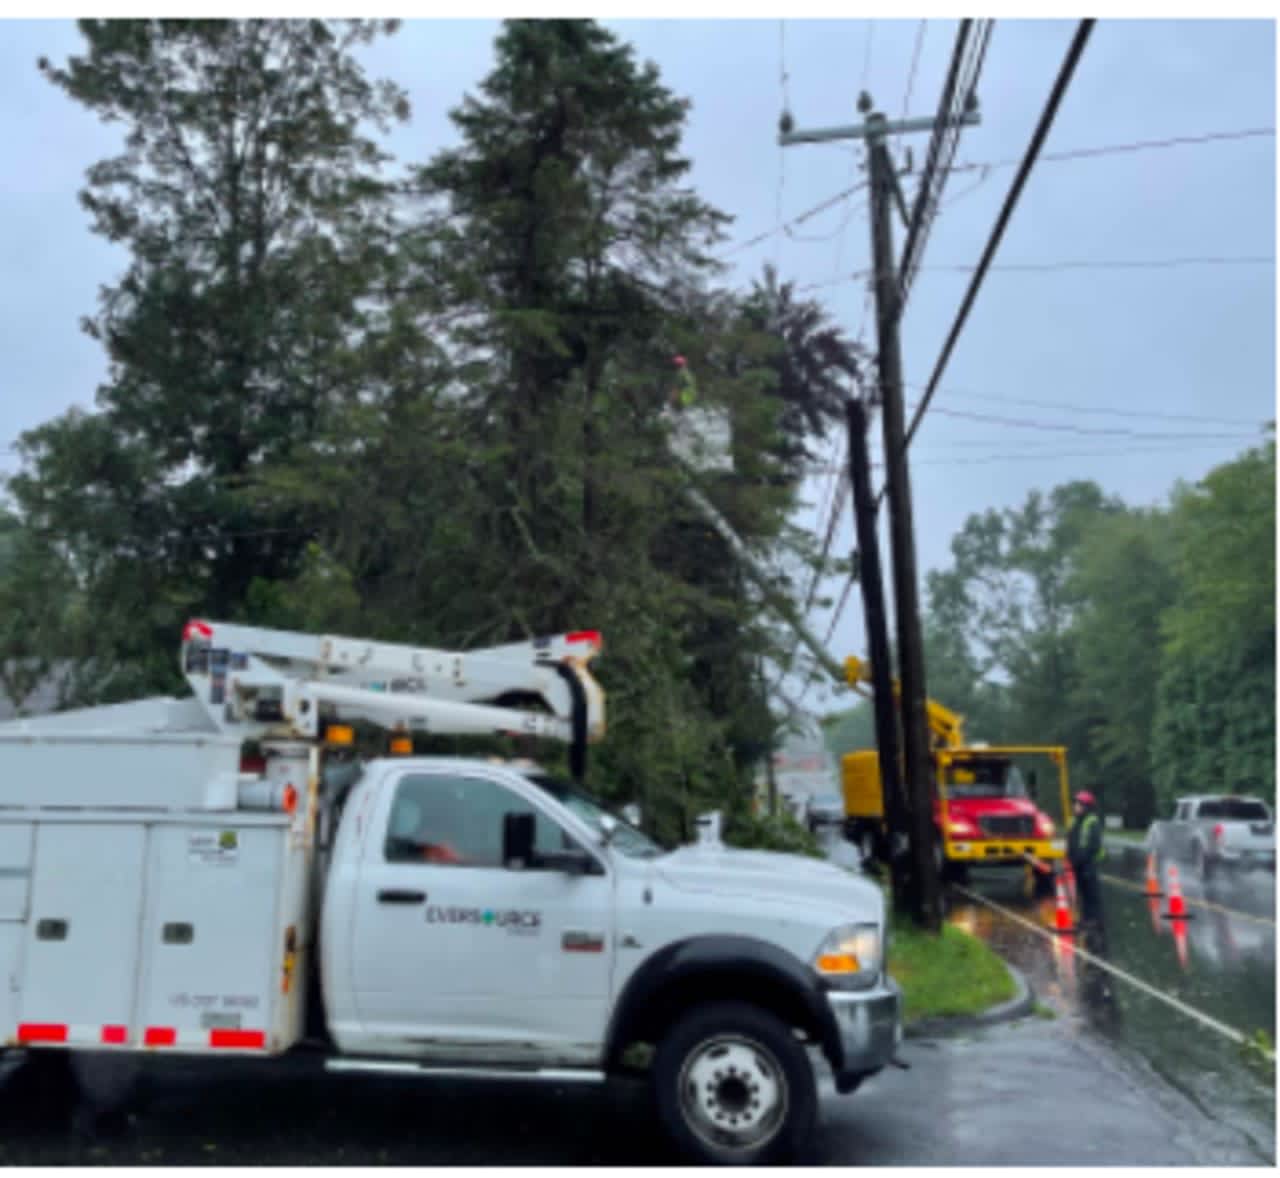 Hundreds of residents in a town in Fairfield County are without power due to downed tree limbs as wind gusts between 30 and 35 miles per hour are being reported in the area.